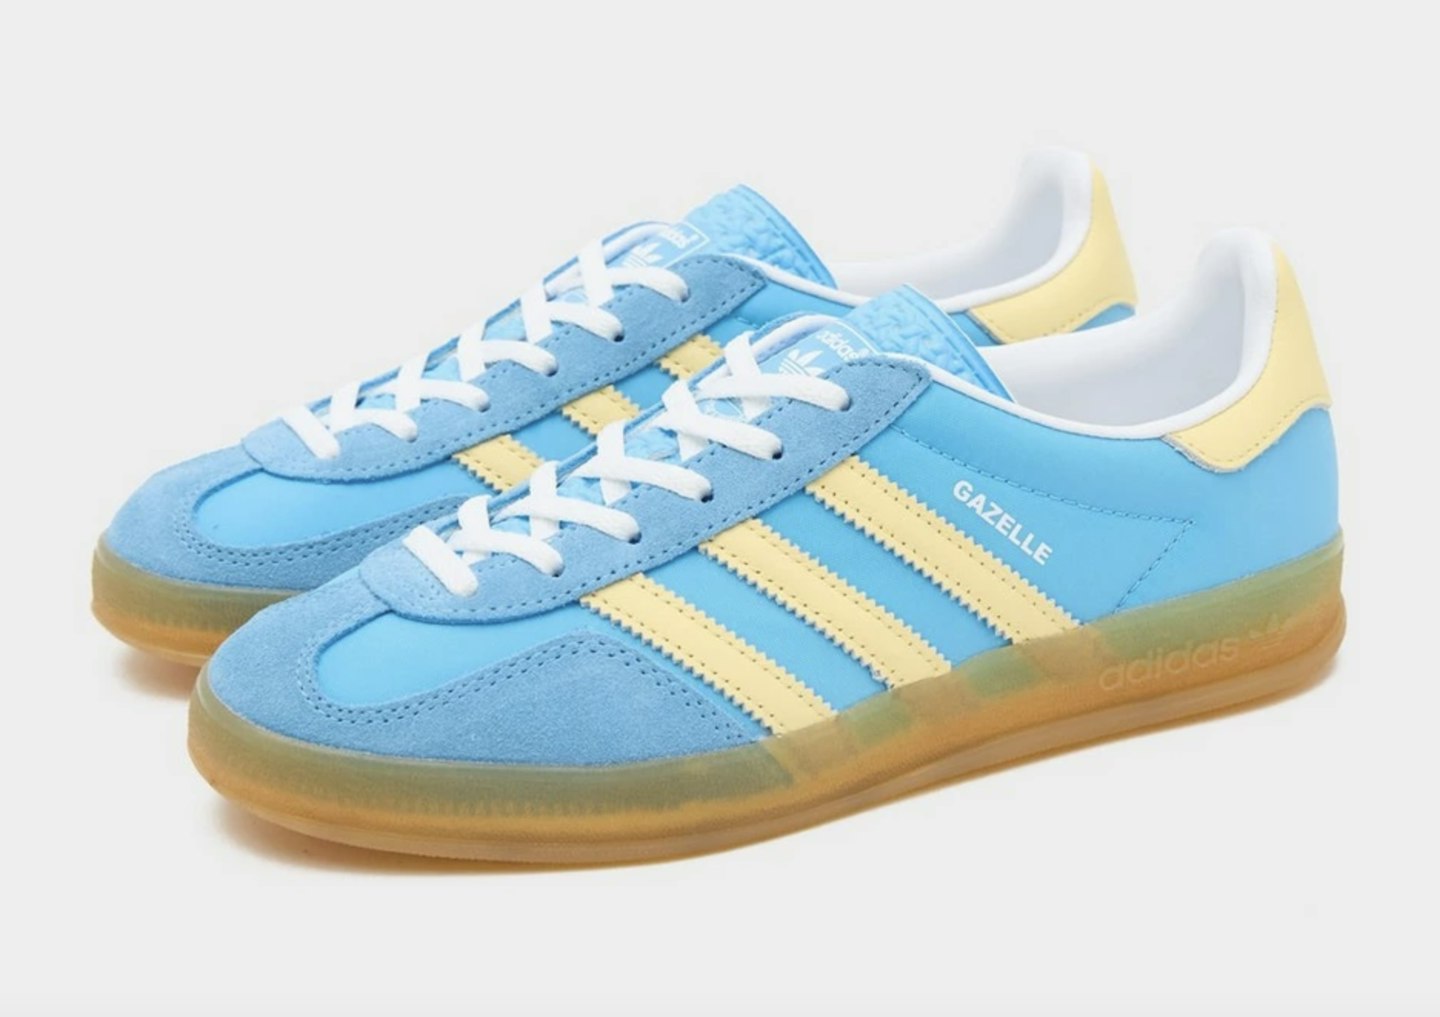 adidas Originals gum sole Gazelle Indoor trainers in blue and yellow